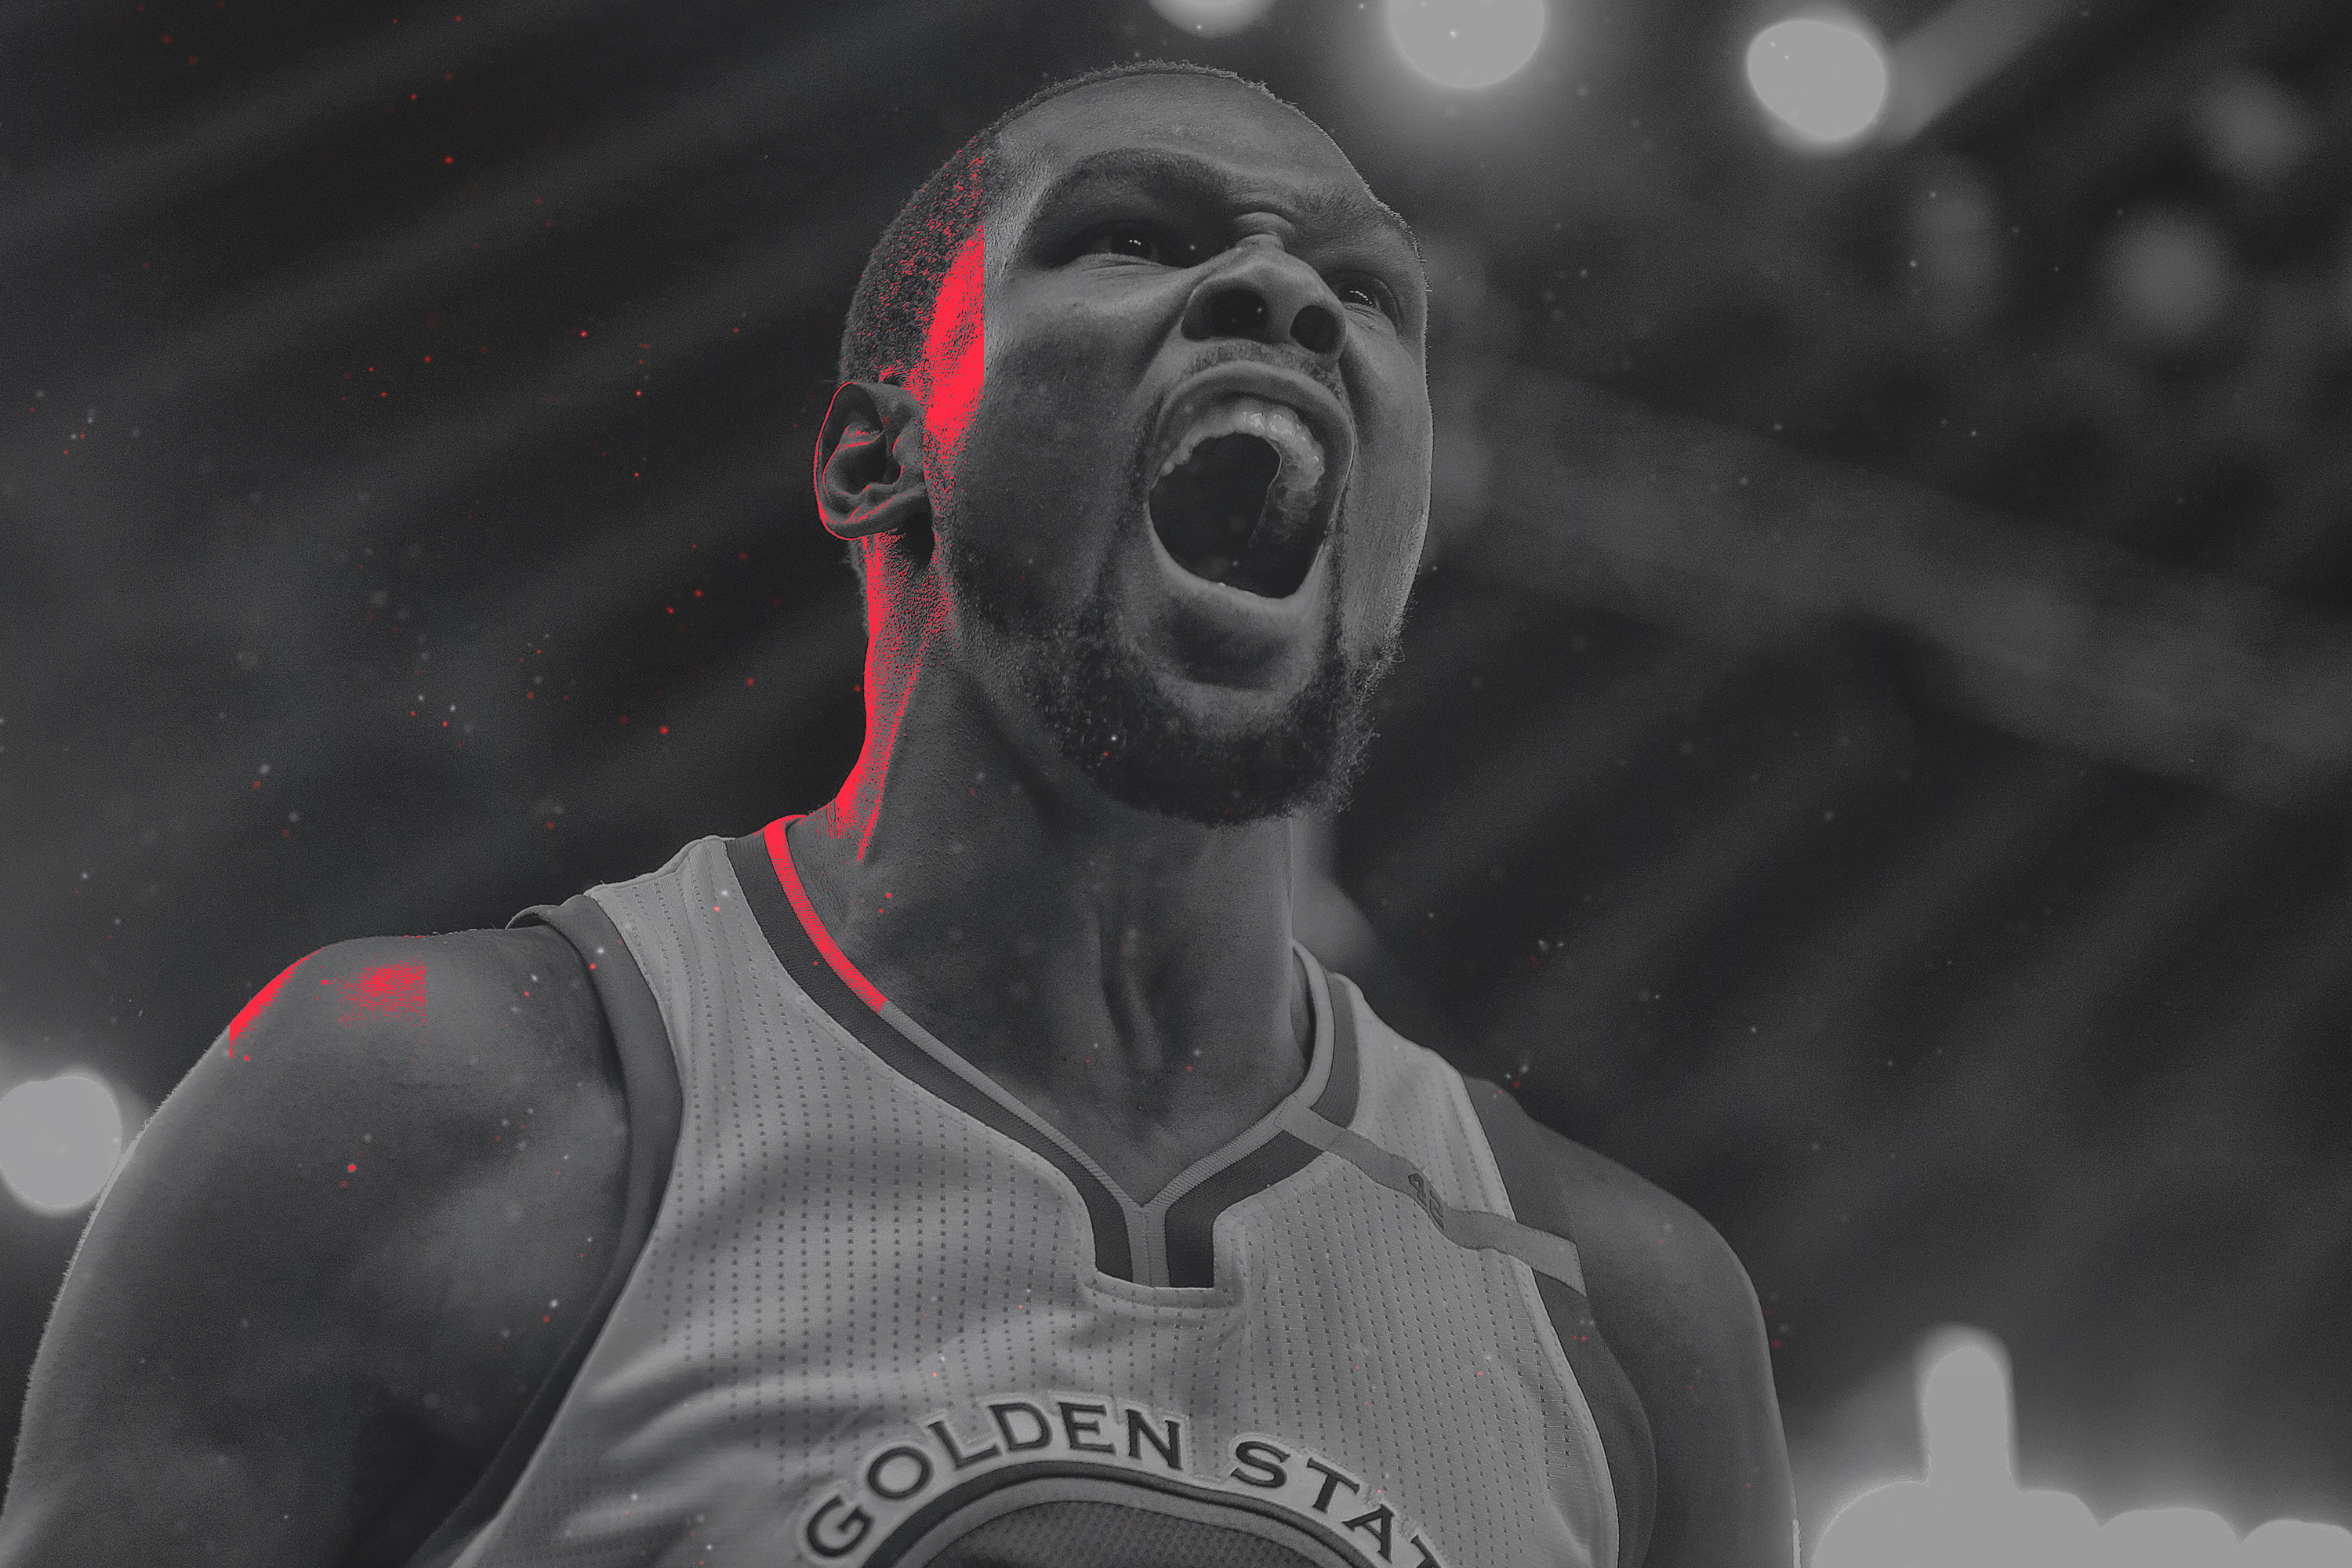 New wallpaper of Kevin Durant, for full size please visit - http